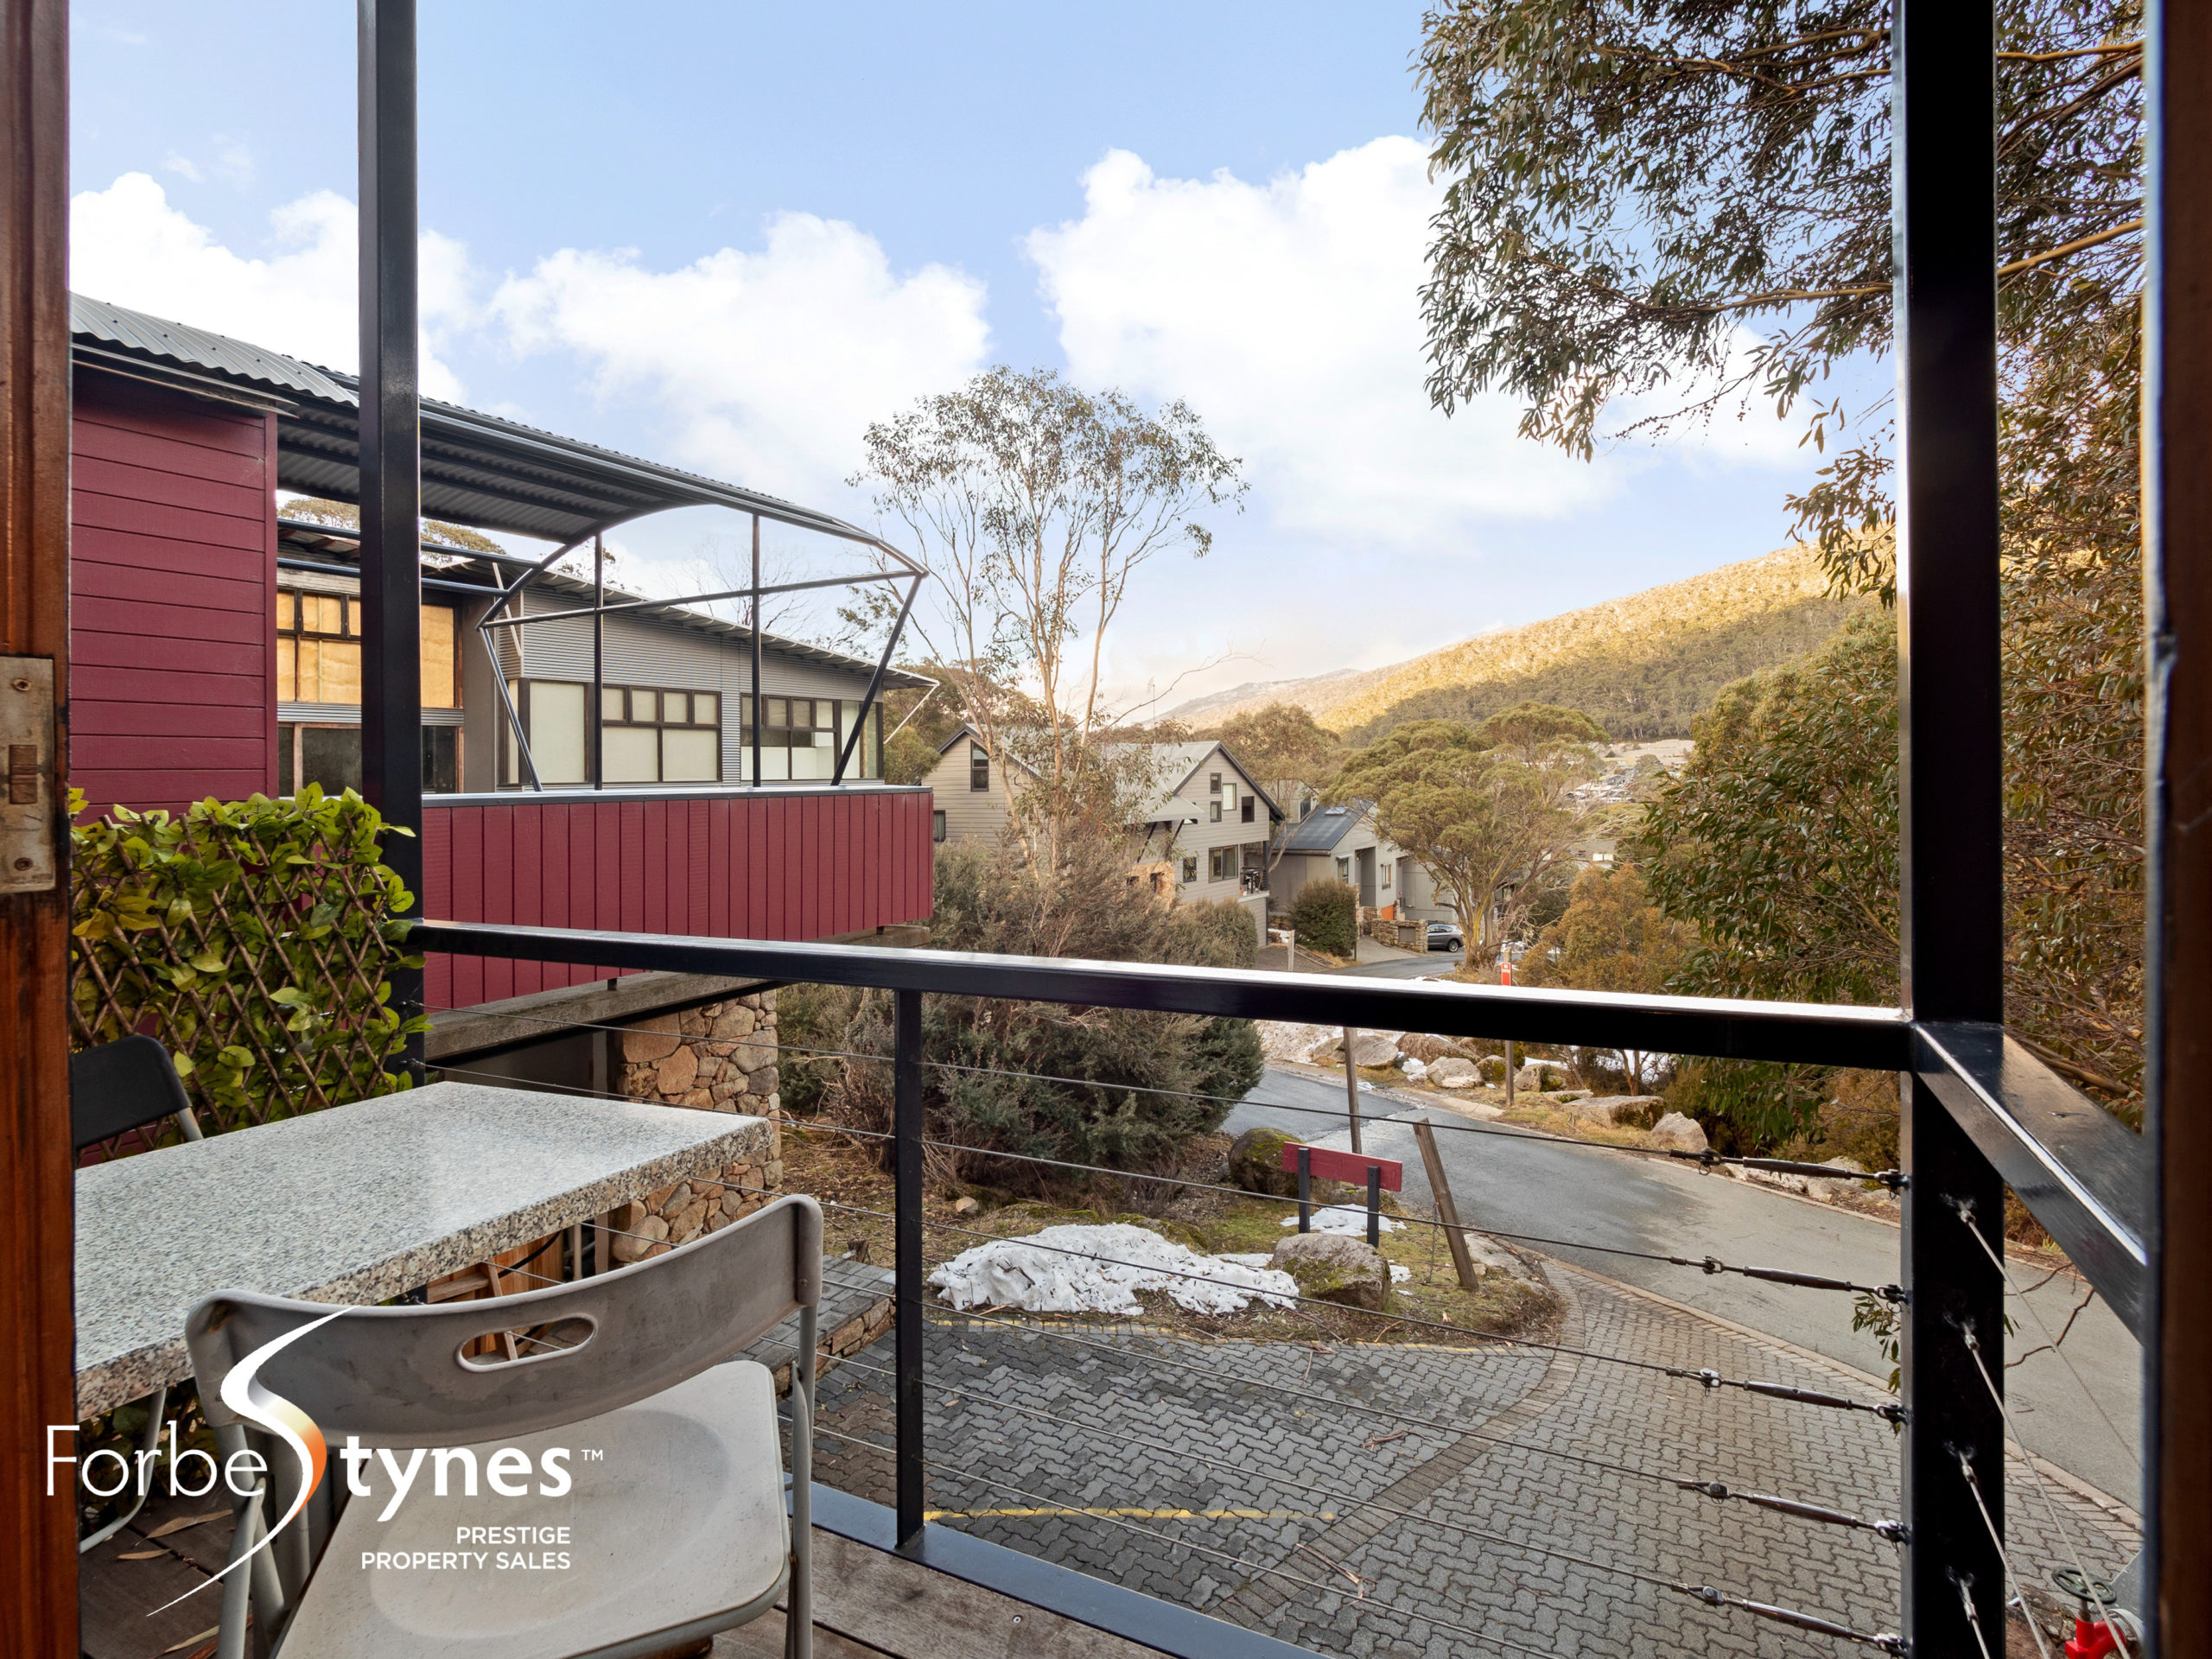 Large Stand-Alone Holiday Home with Self Contained Attached Apartment<br><br>Expressions of Interest over $3.5M